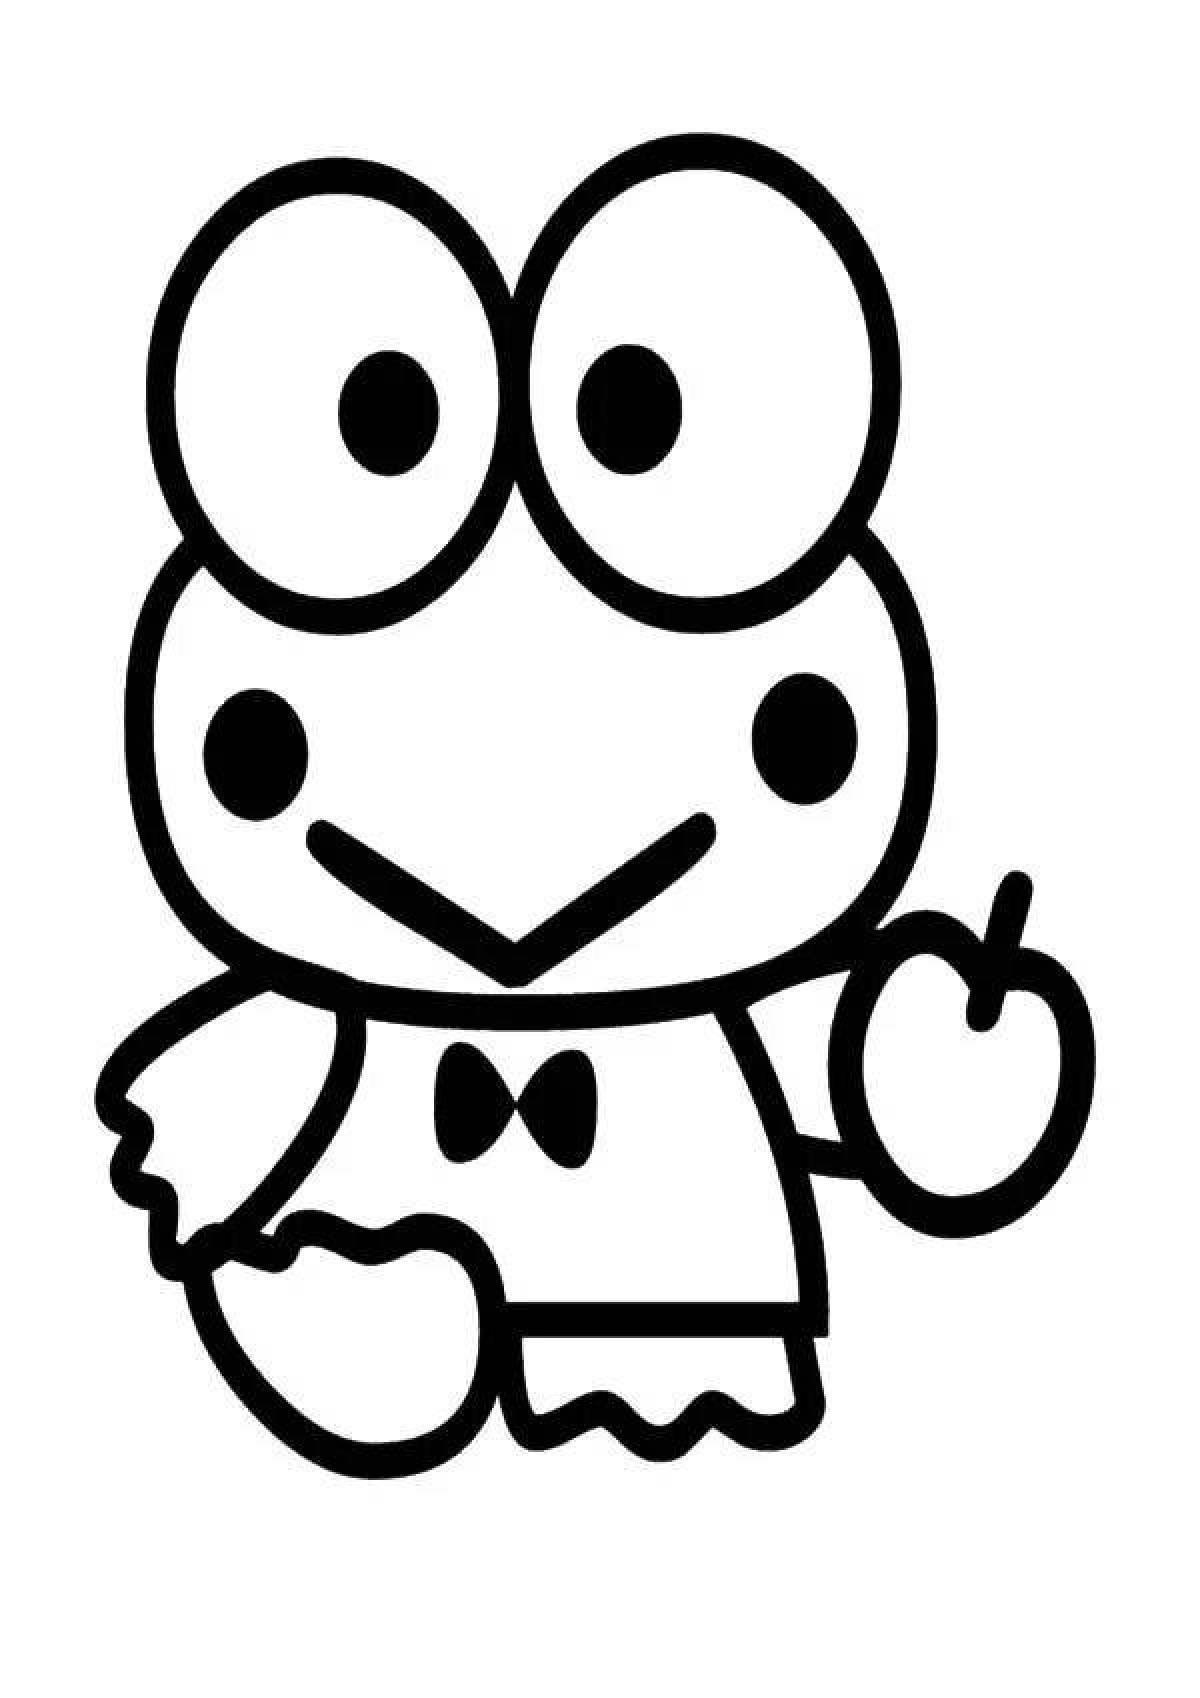 Cute hello kitty frog coloring page